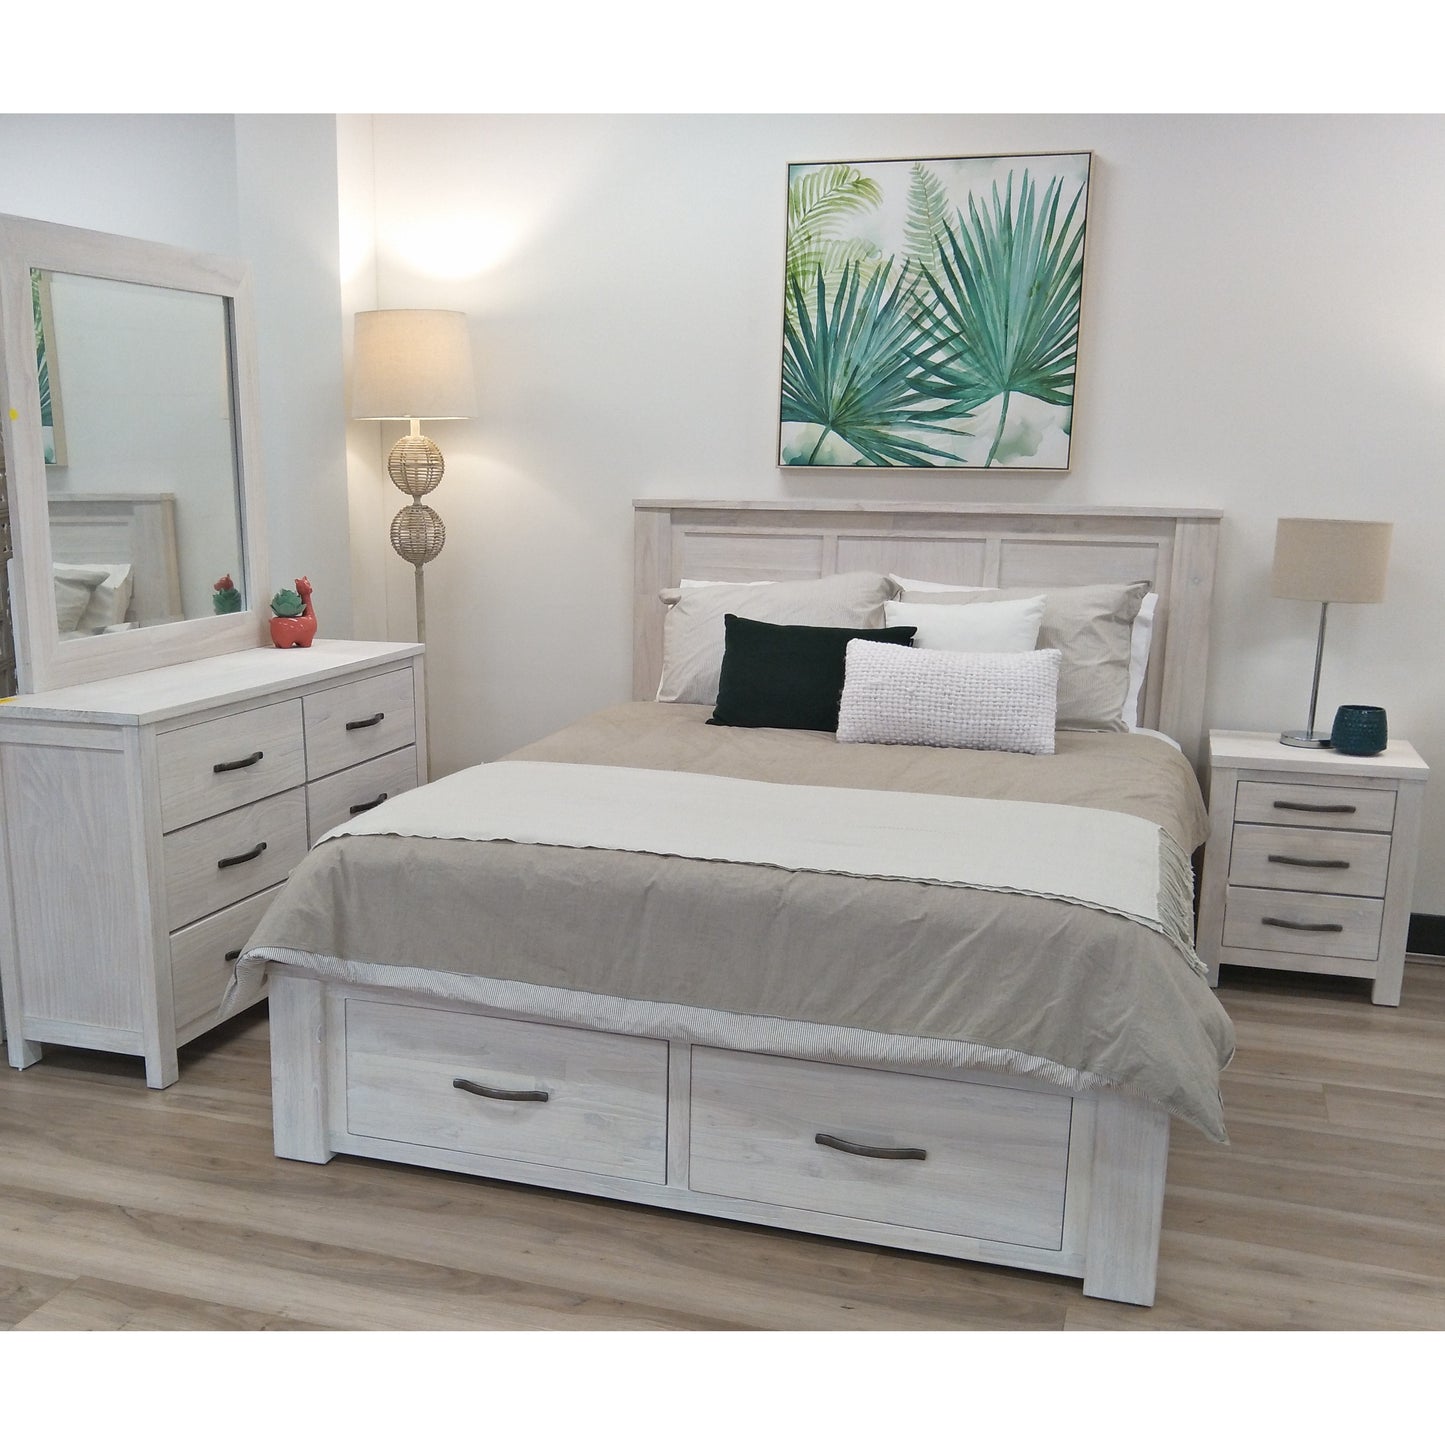 Double Foxglove Bed Frame With Storage Drawers - White